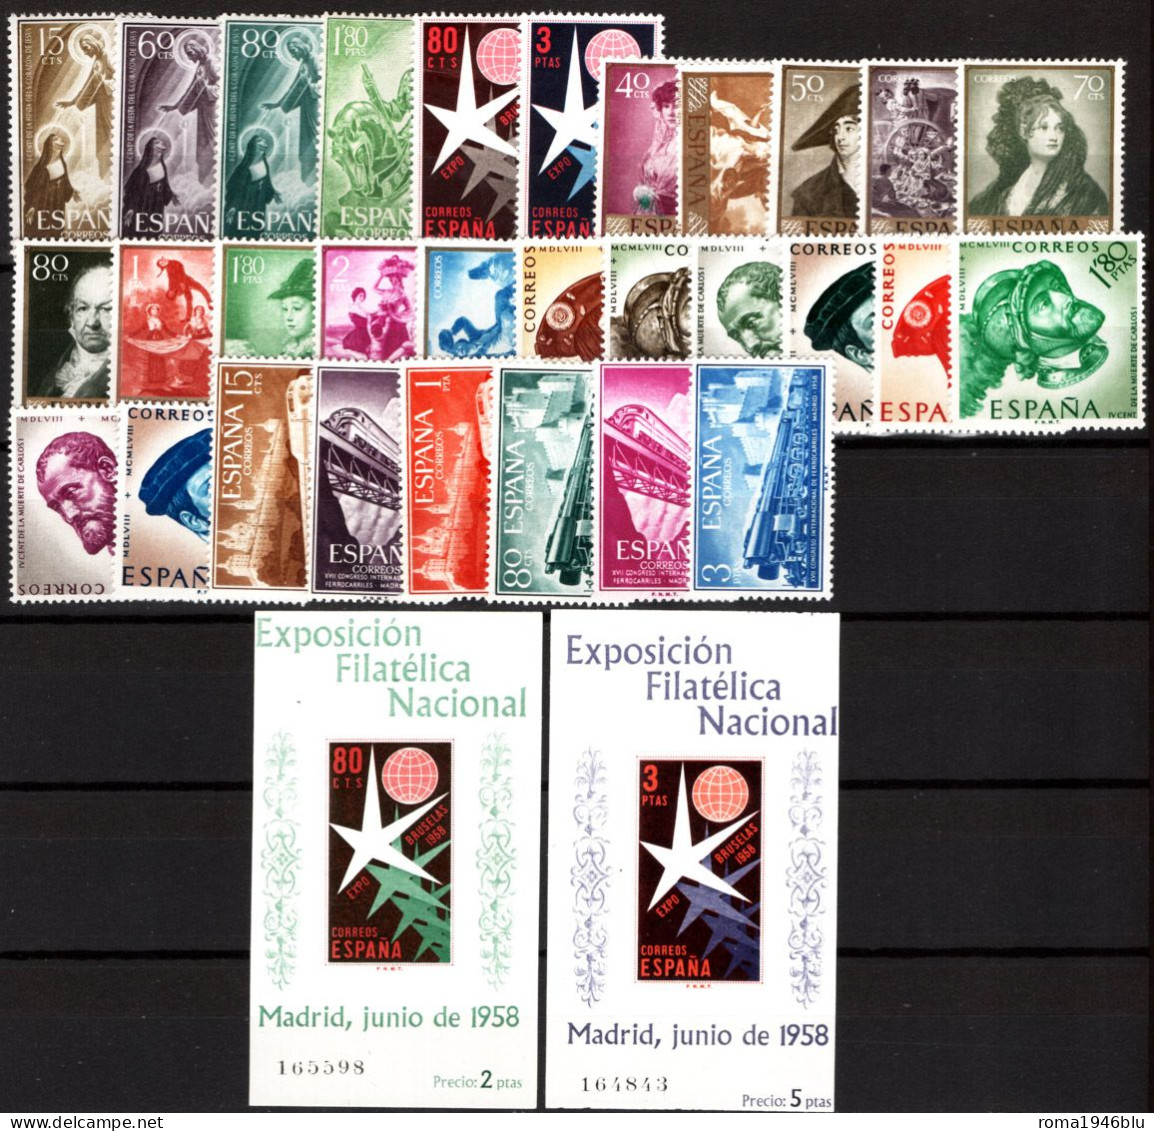 Spagna 1957/58 Annate Completa / Complete Year Set **/MNH VF/F - Annate Complete